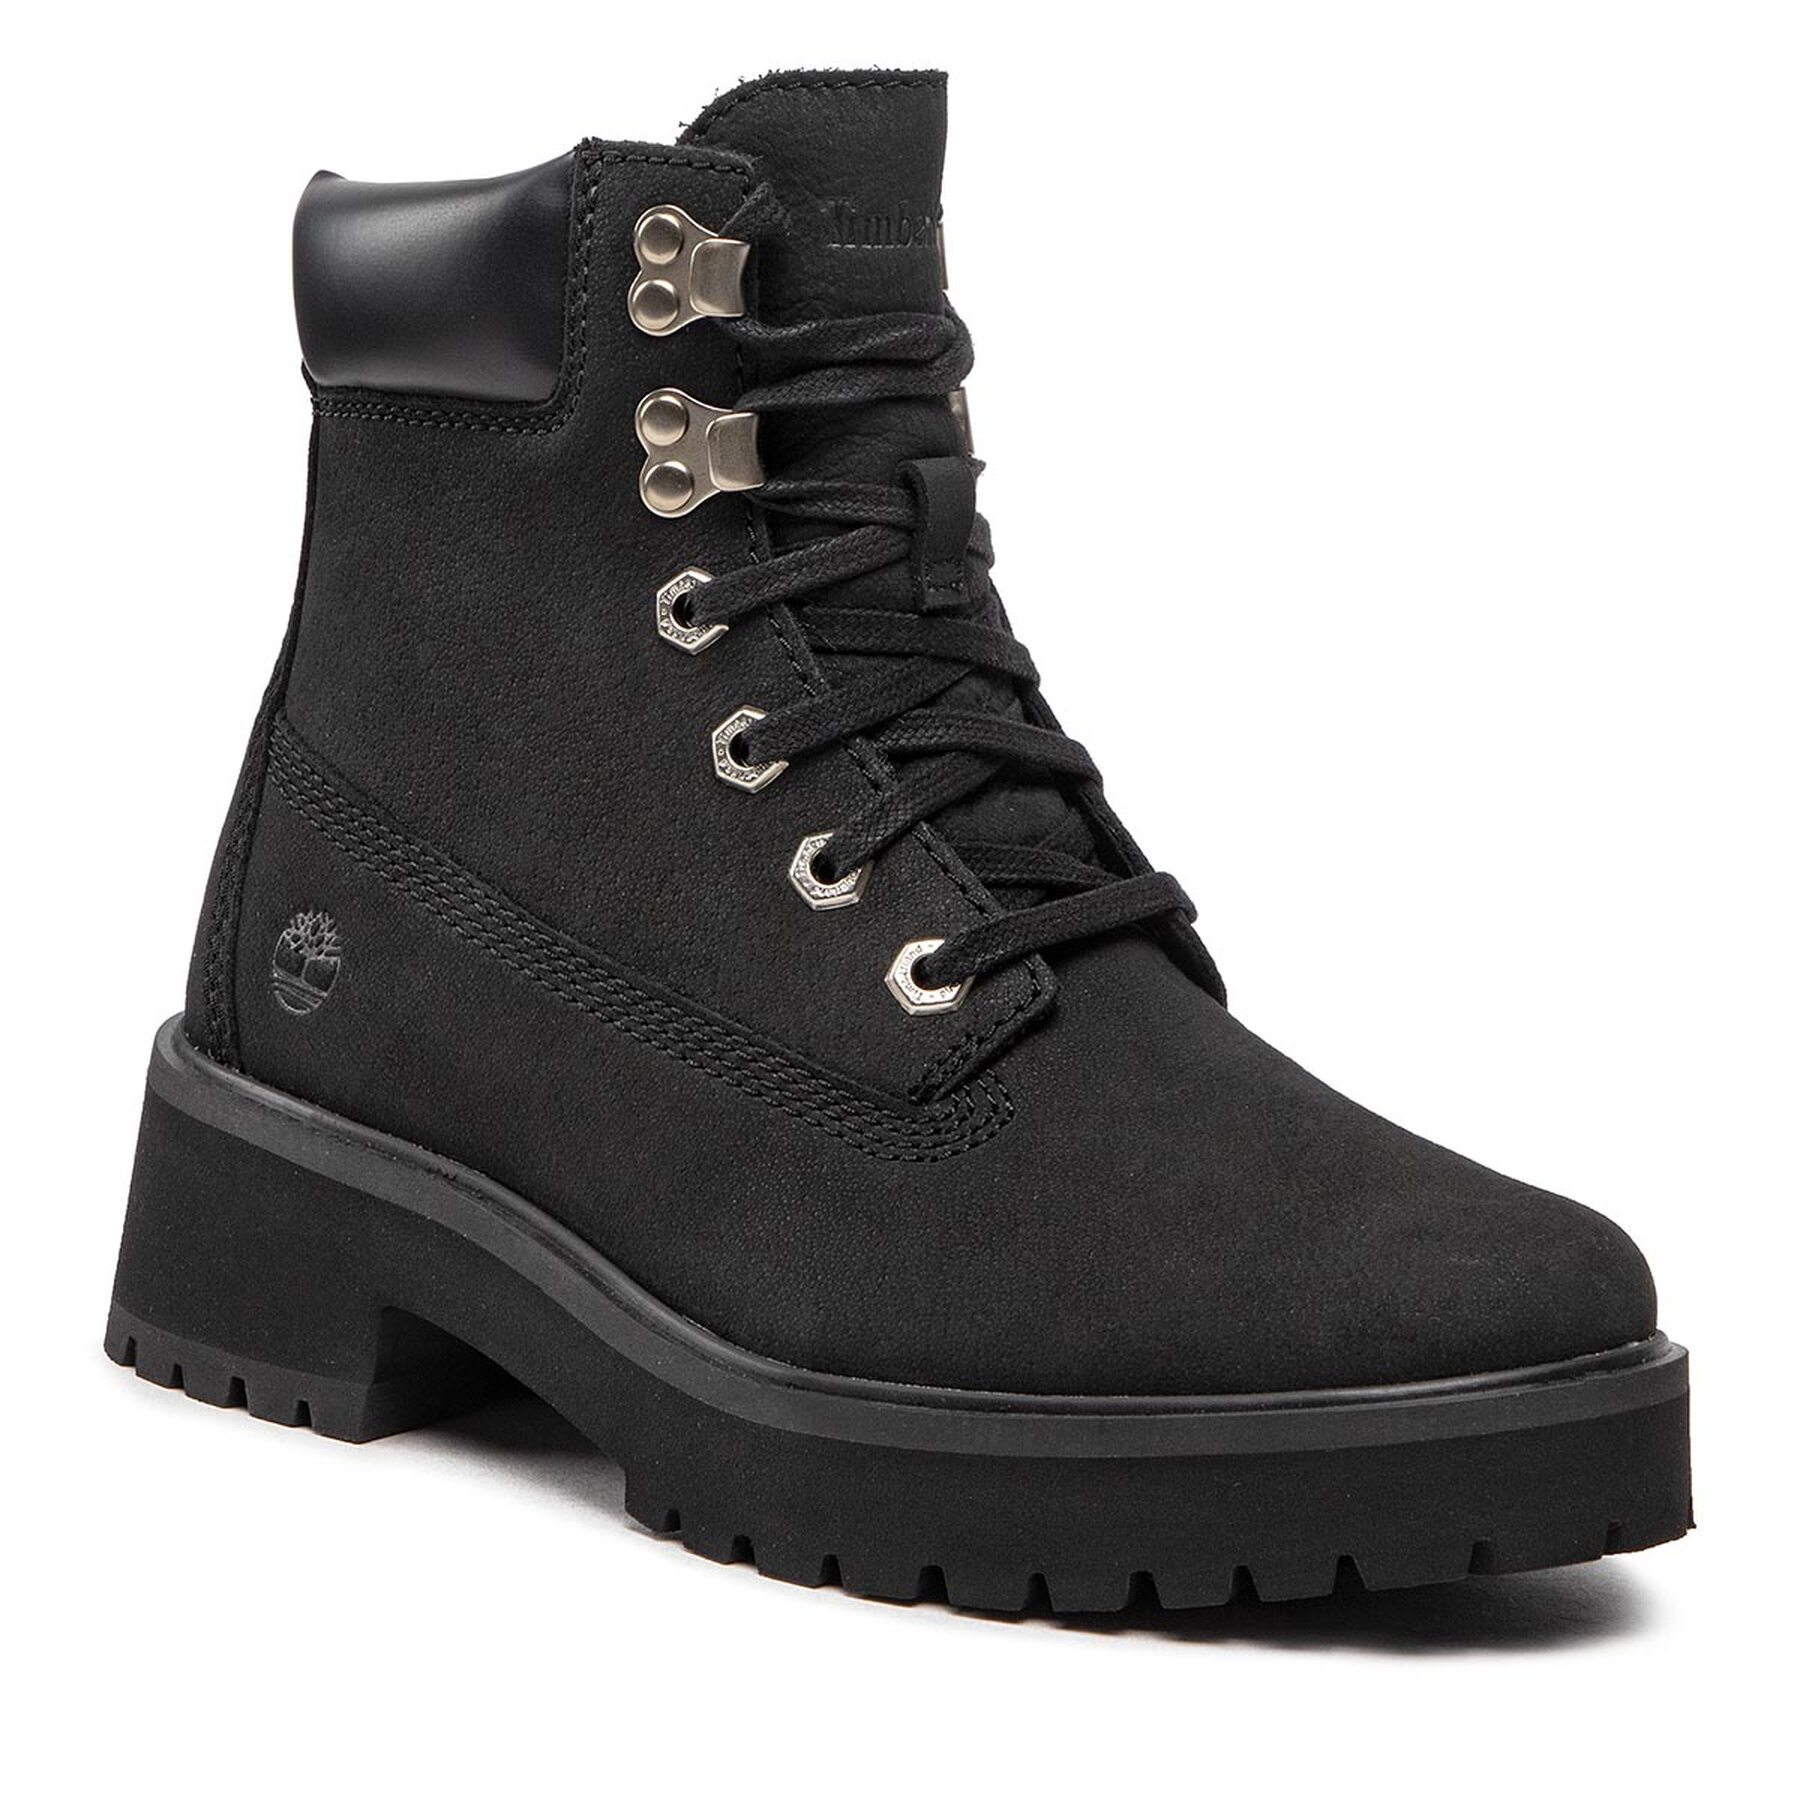 Trappers Timberland Carnaby Cool 6in TB0A5NYY015 Black Nubuck epantofi.ro imagine noua